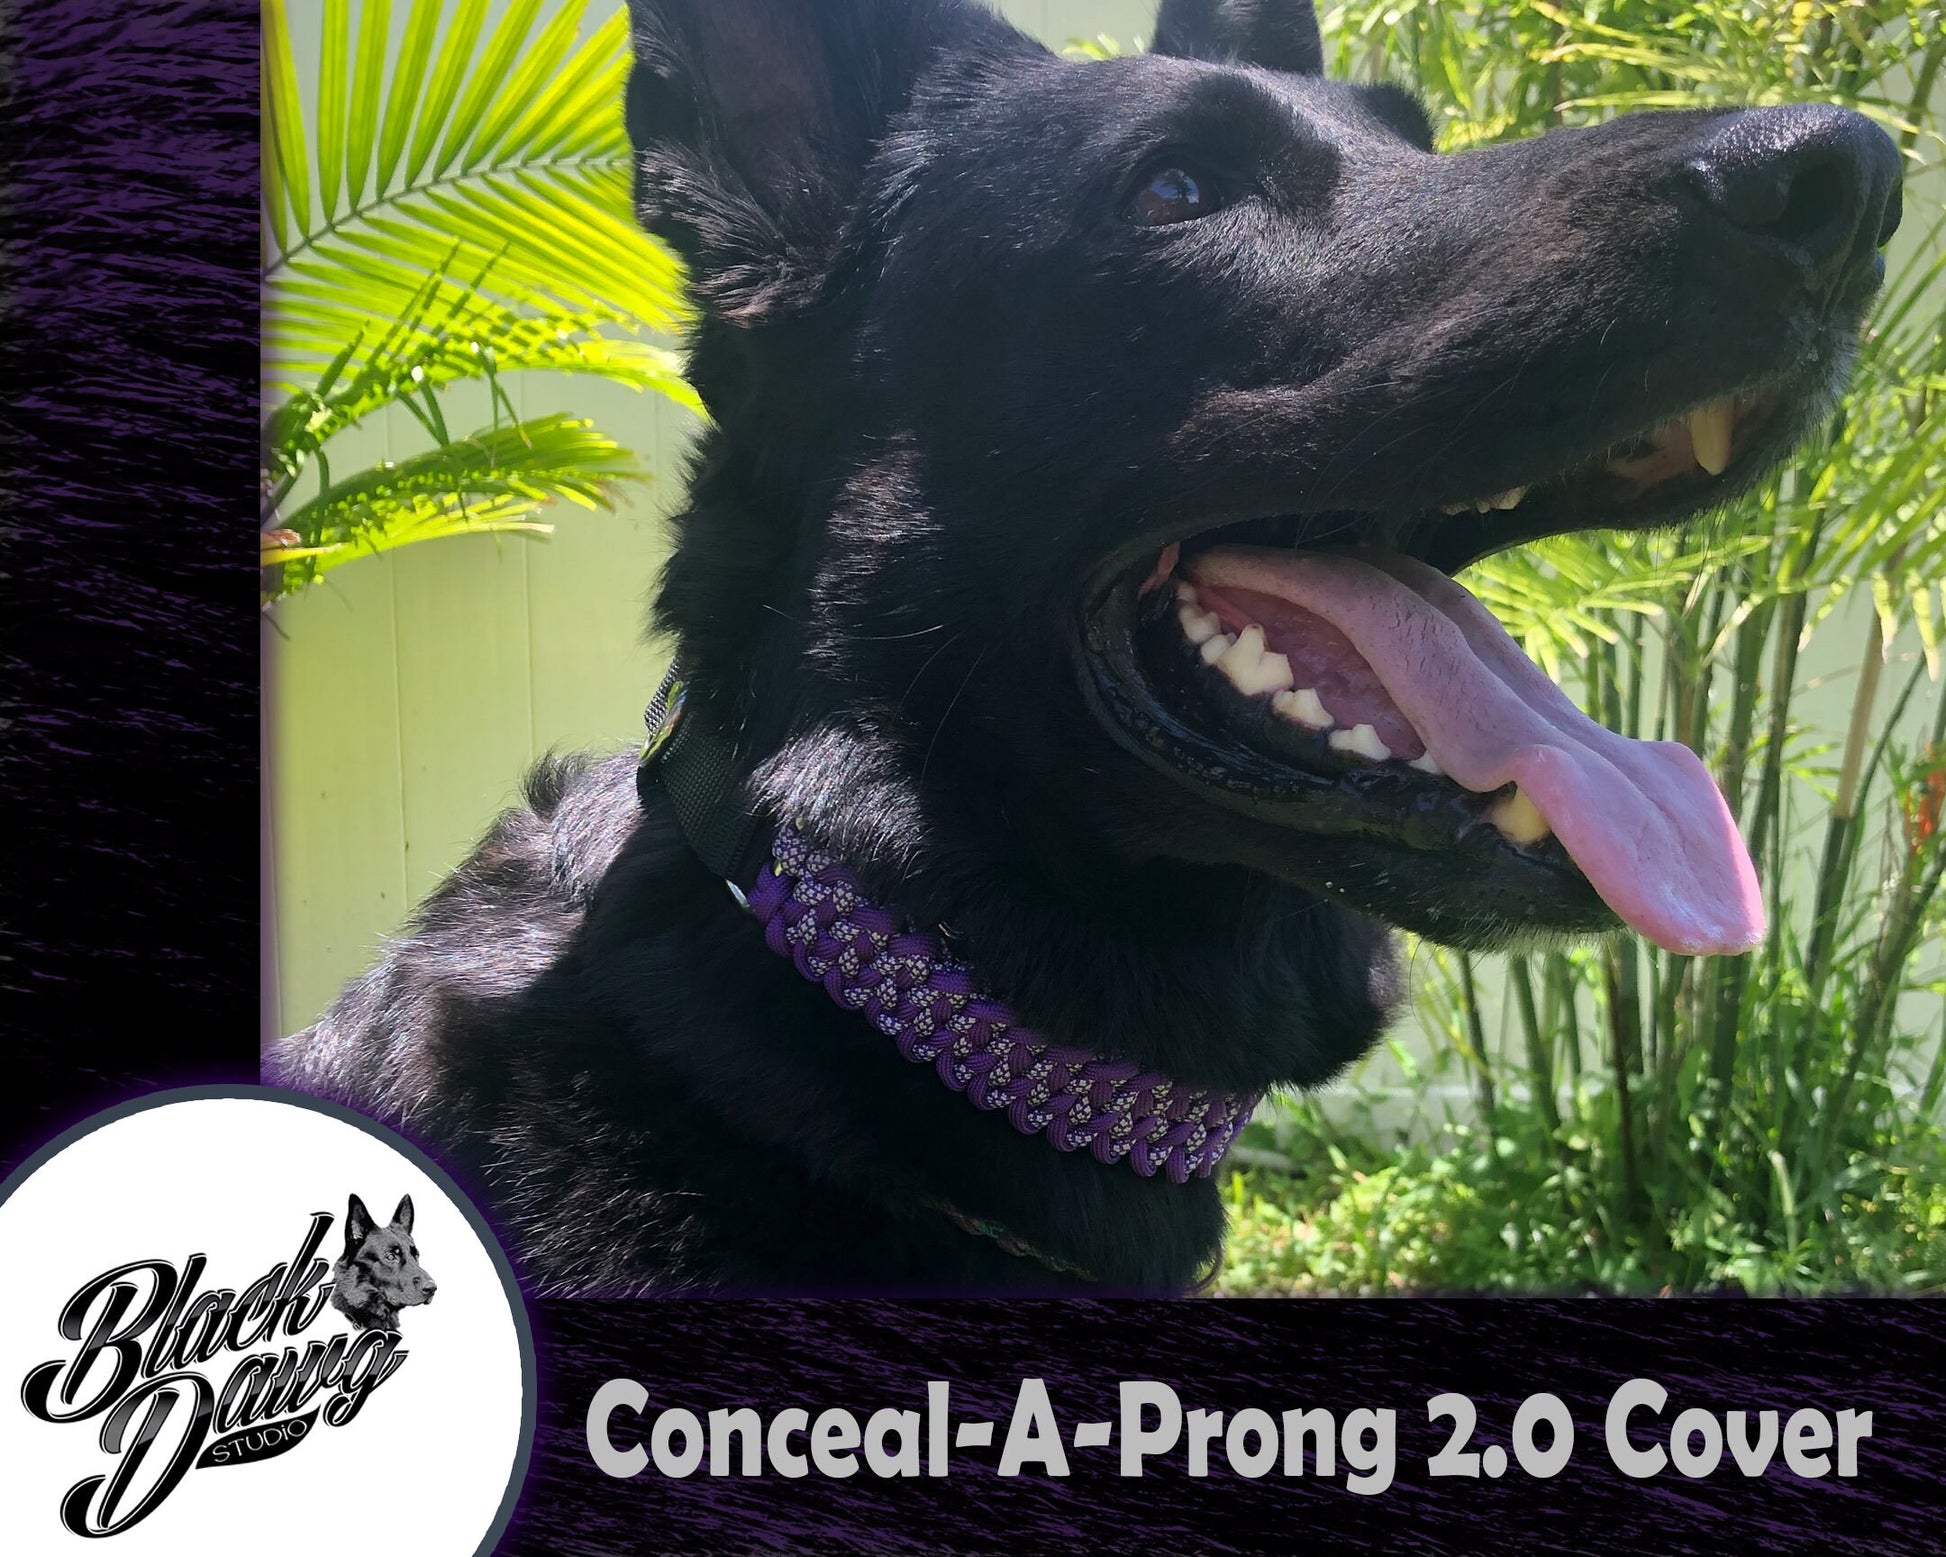 Conceal-A-Prong 2.0 - Paracord Prong Collar Cover - 7 Links in Plasma and Purple